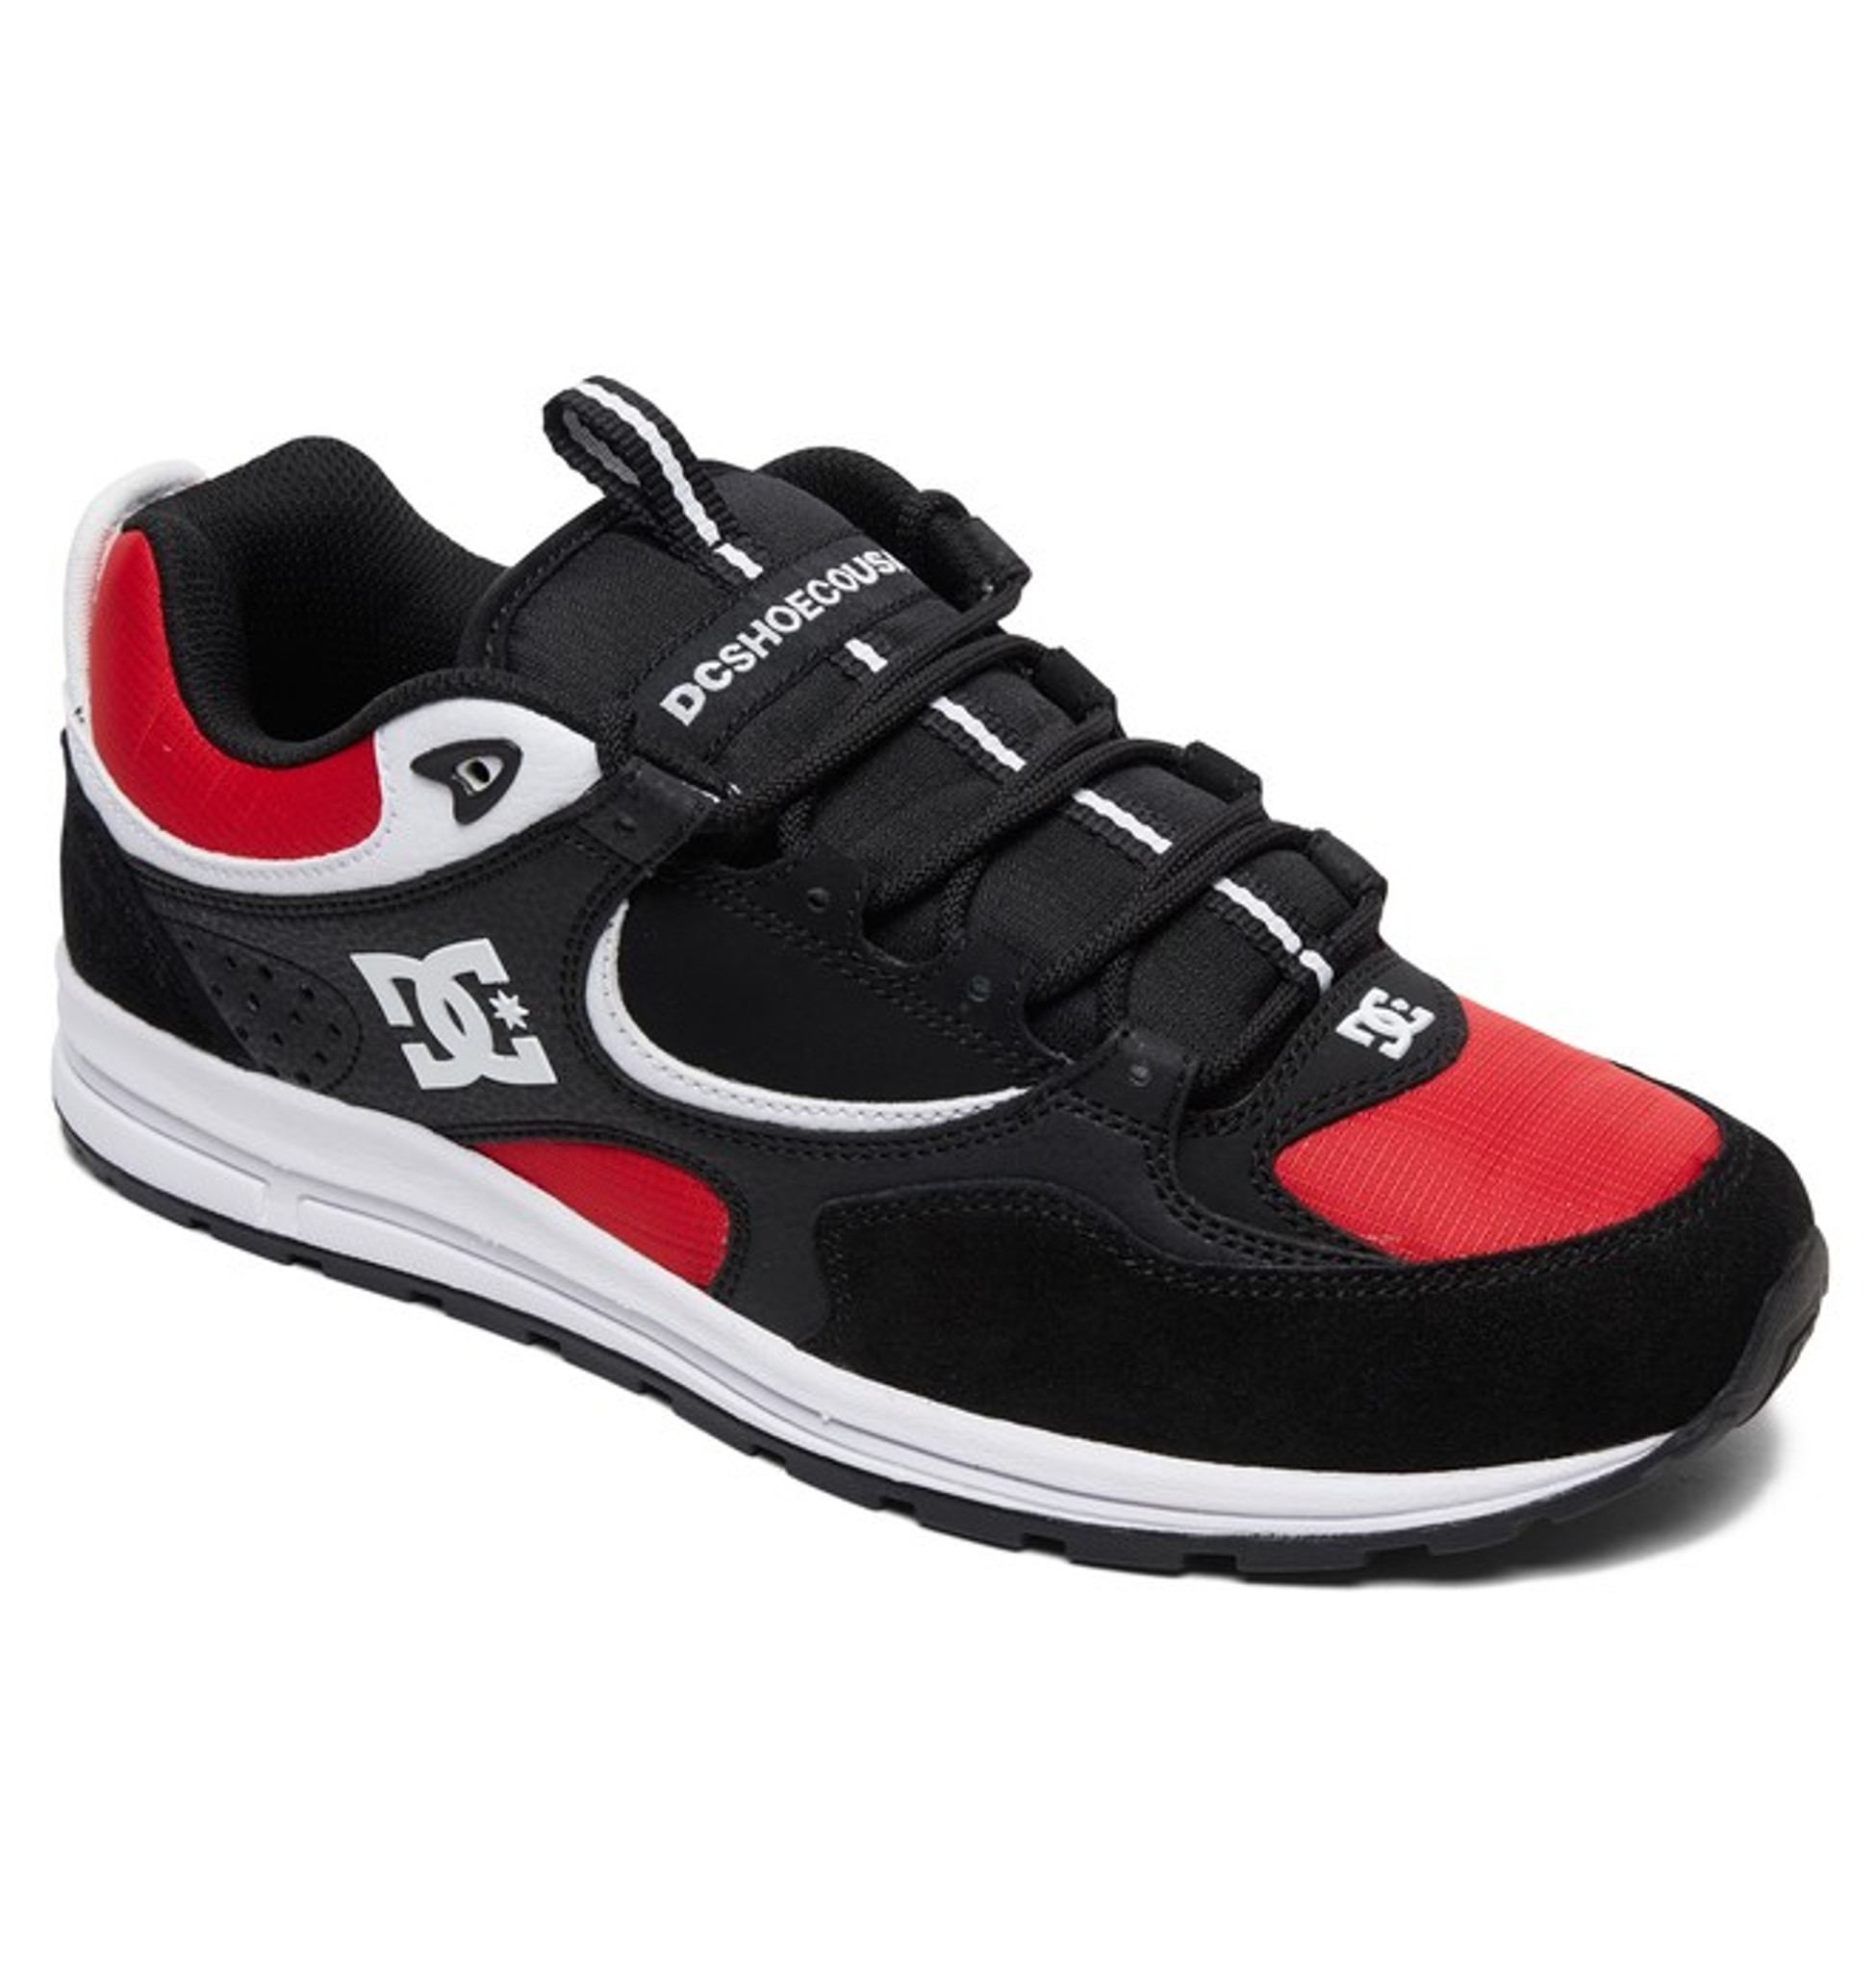 dc shoes red and white